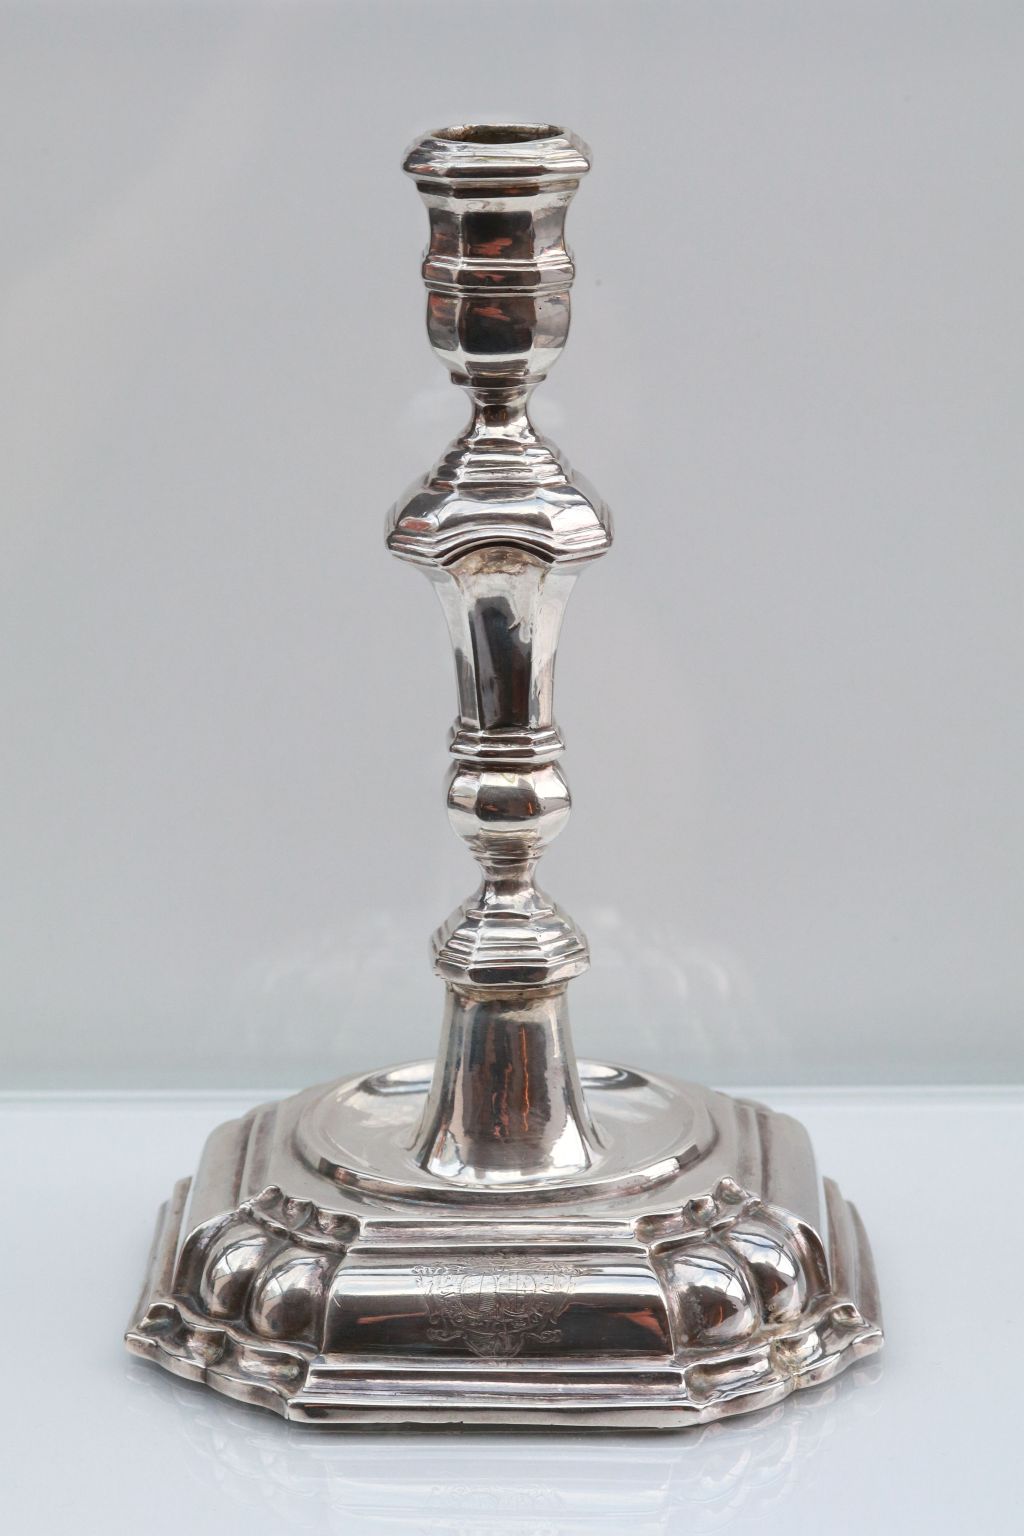 Baroque Silver Candlestick Augsburg early 18th century works of art